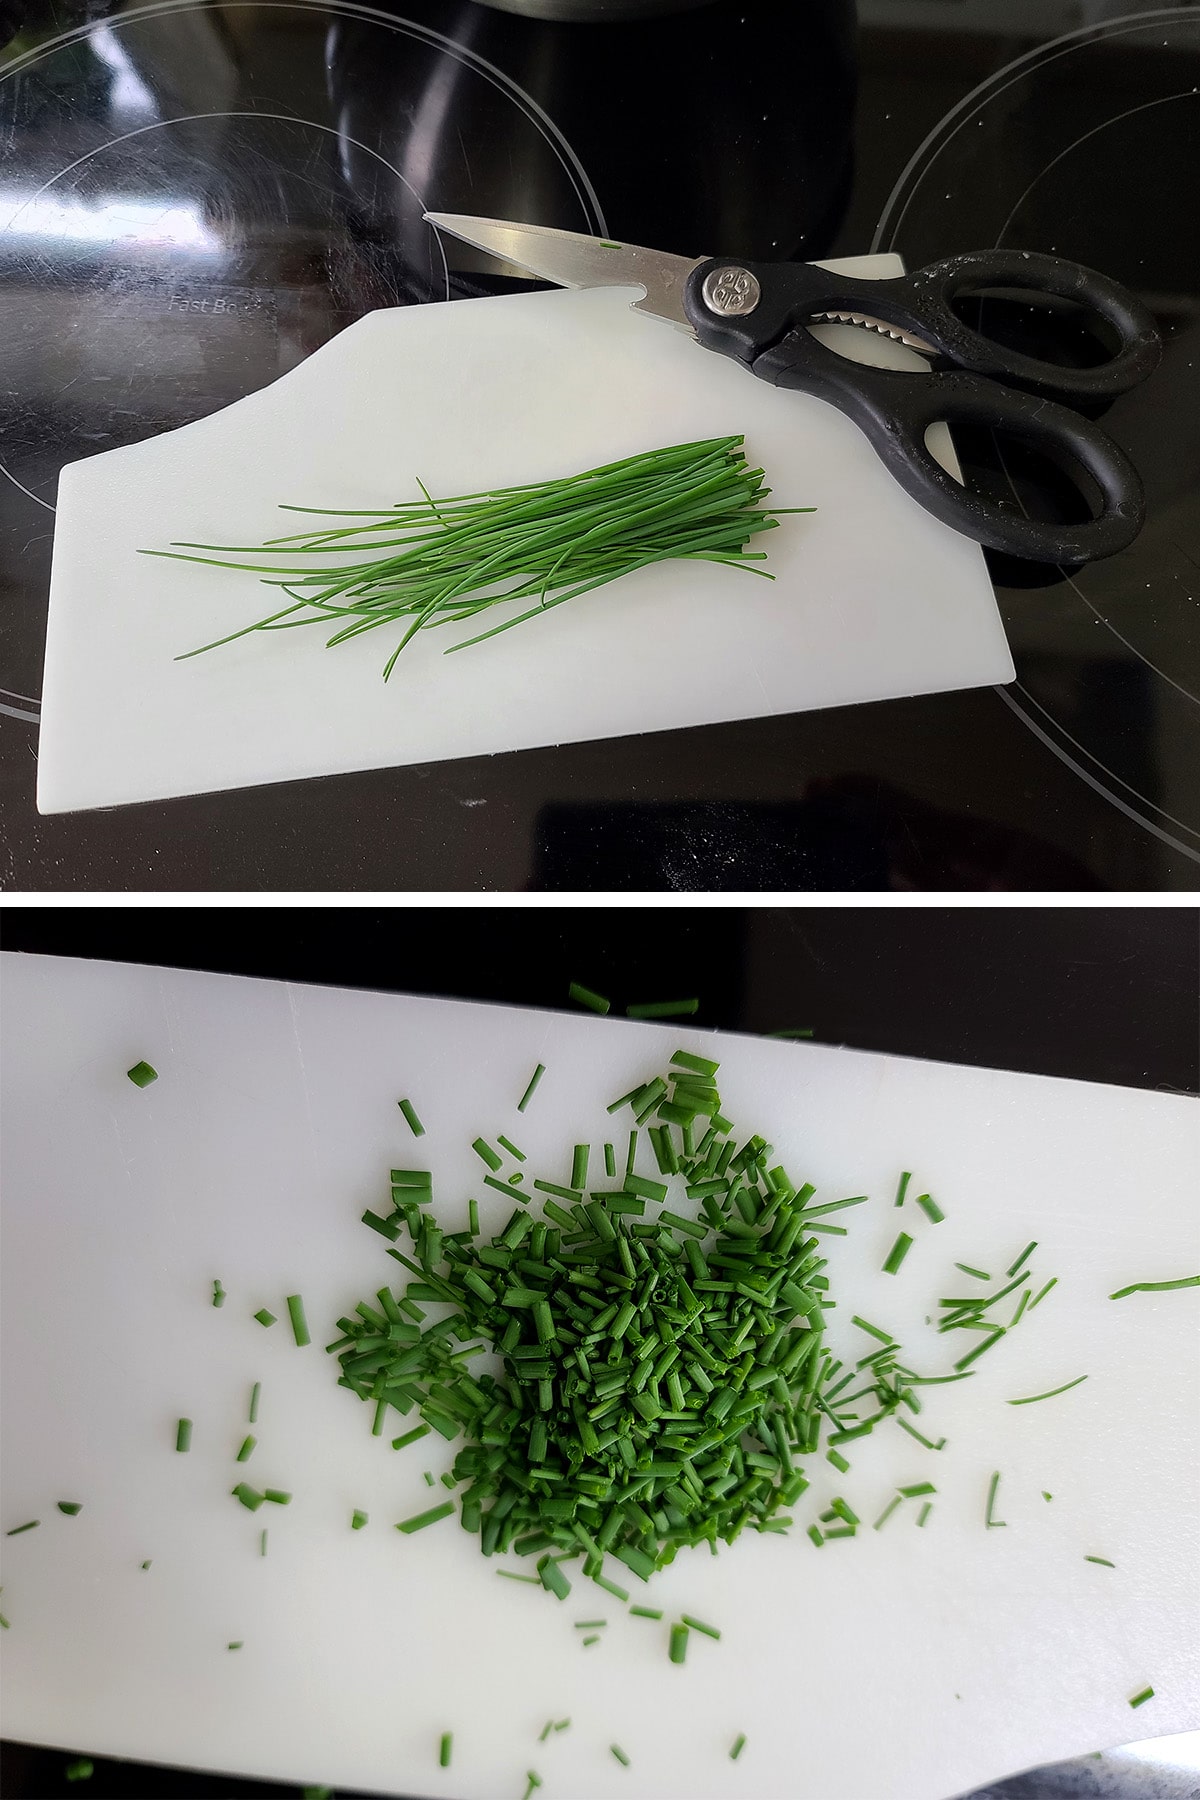 A two part compilation image showing a handful of freshly picked chives, and those chives chopped up.